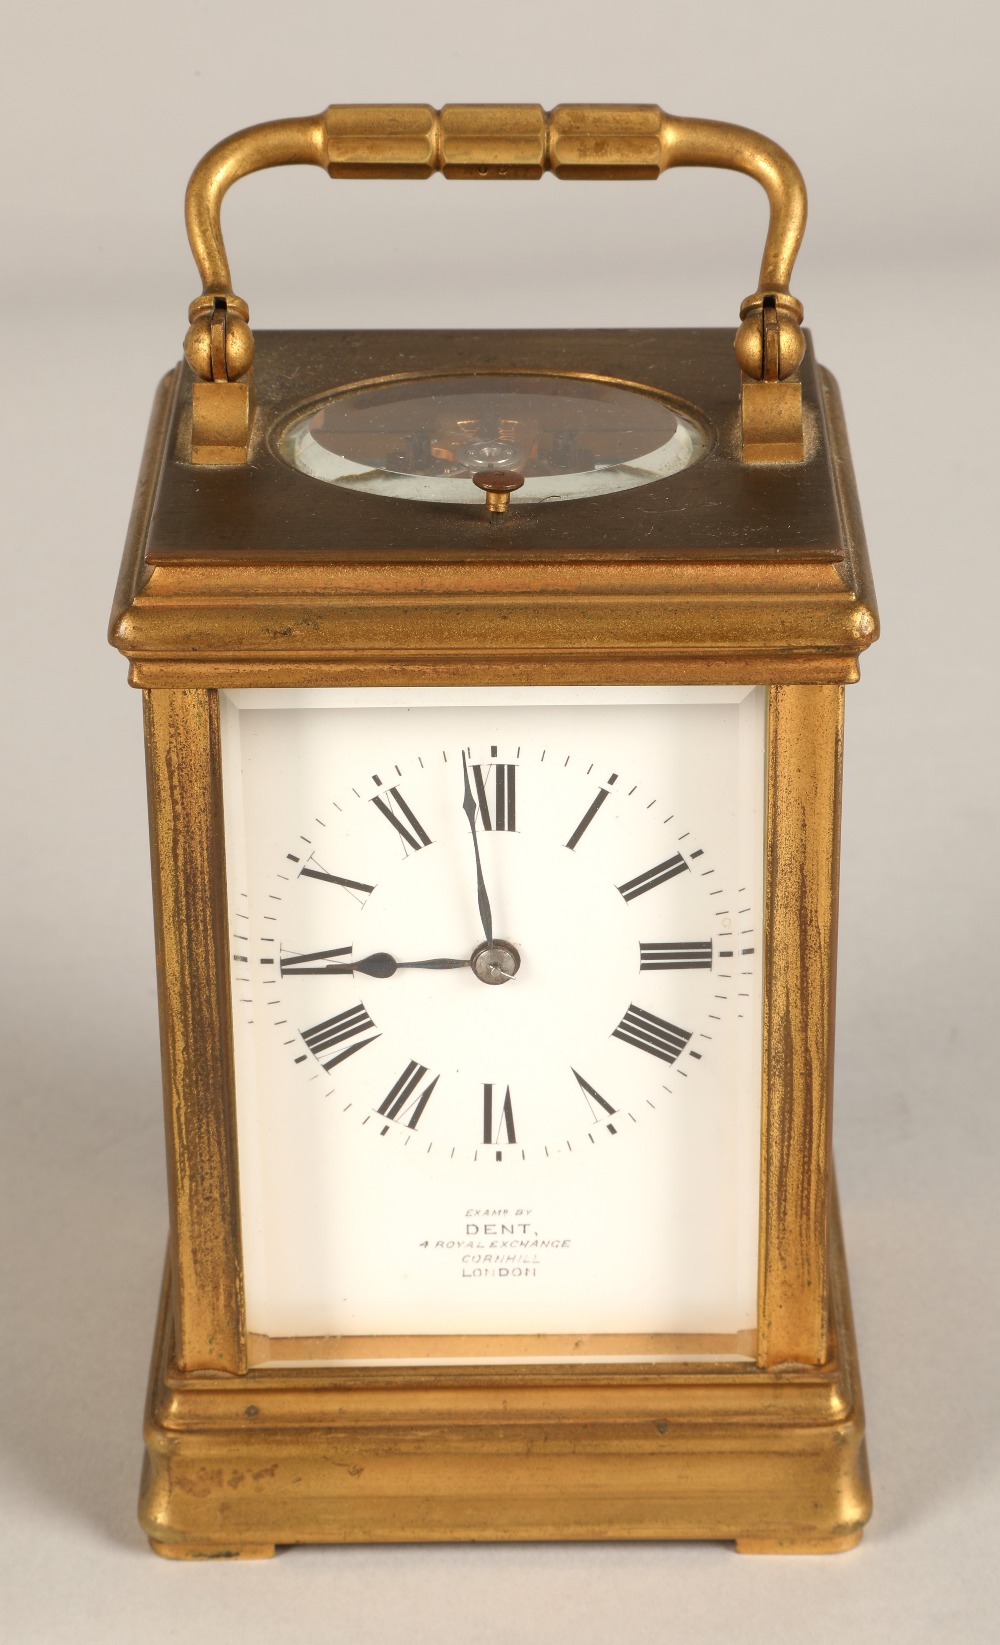 French brass repeating carriage clock, engraved AIGUILLES on the back,  Examp by Dent, 4 Royal - Bild 5 aus 12